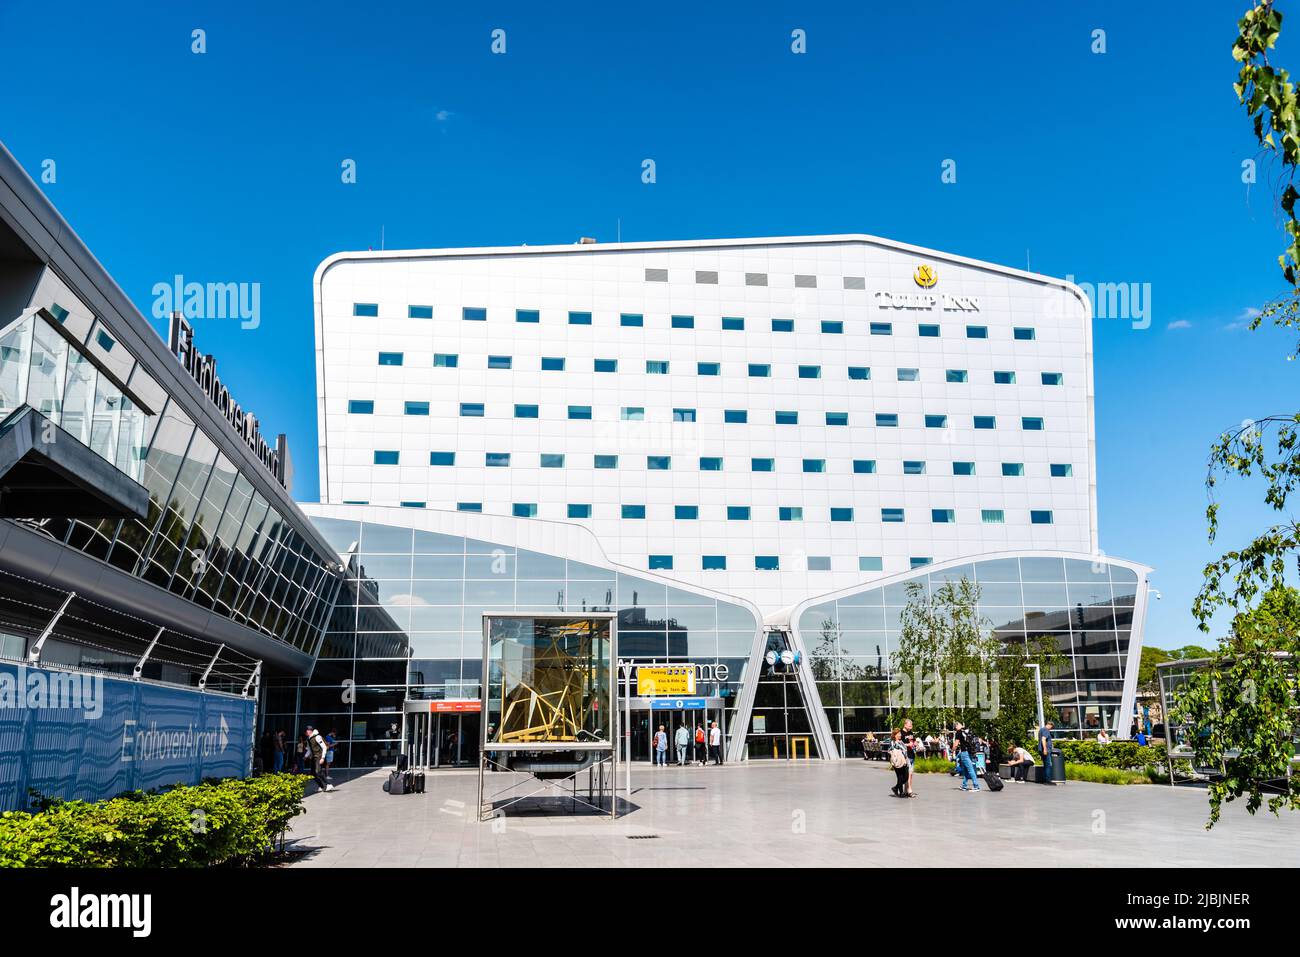 Eindhoven, Netherlands - May 89, 2022: The new terminal of the airport. Transportation contemporary architecture Stock Photo